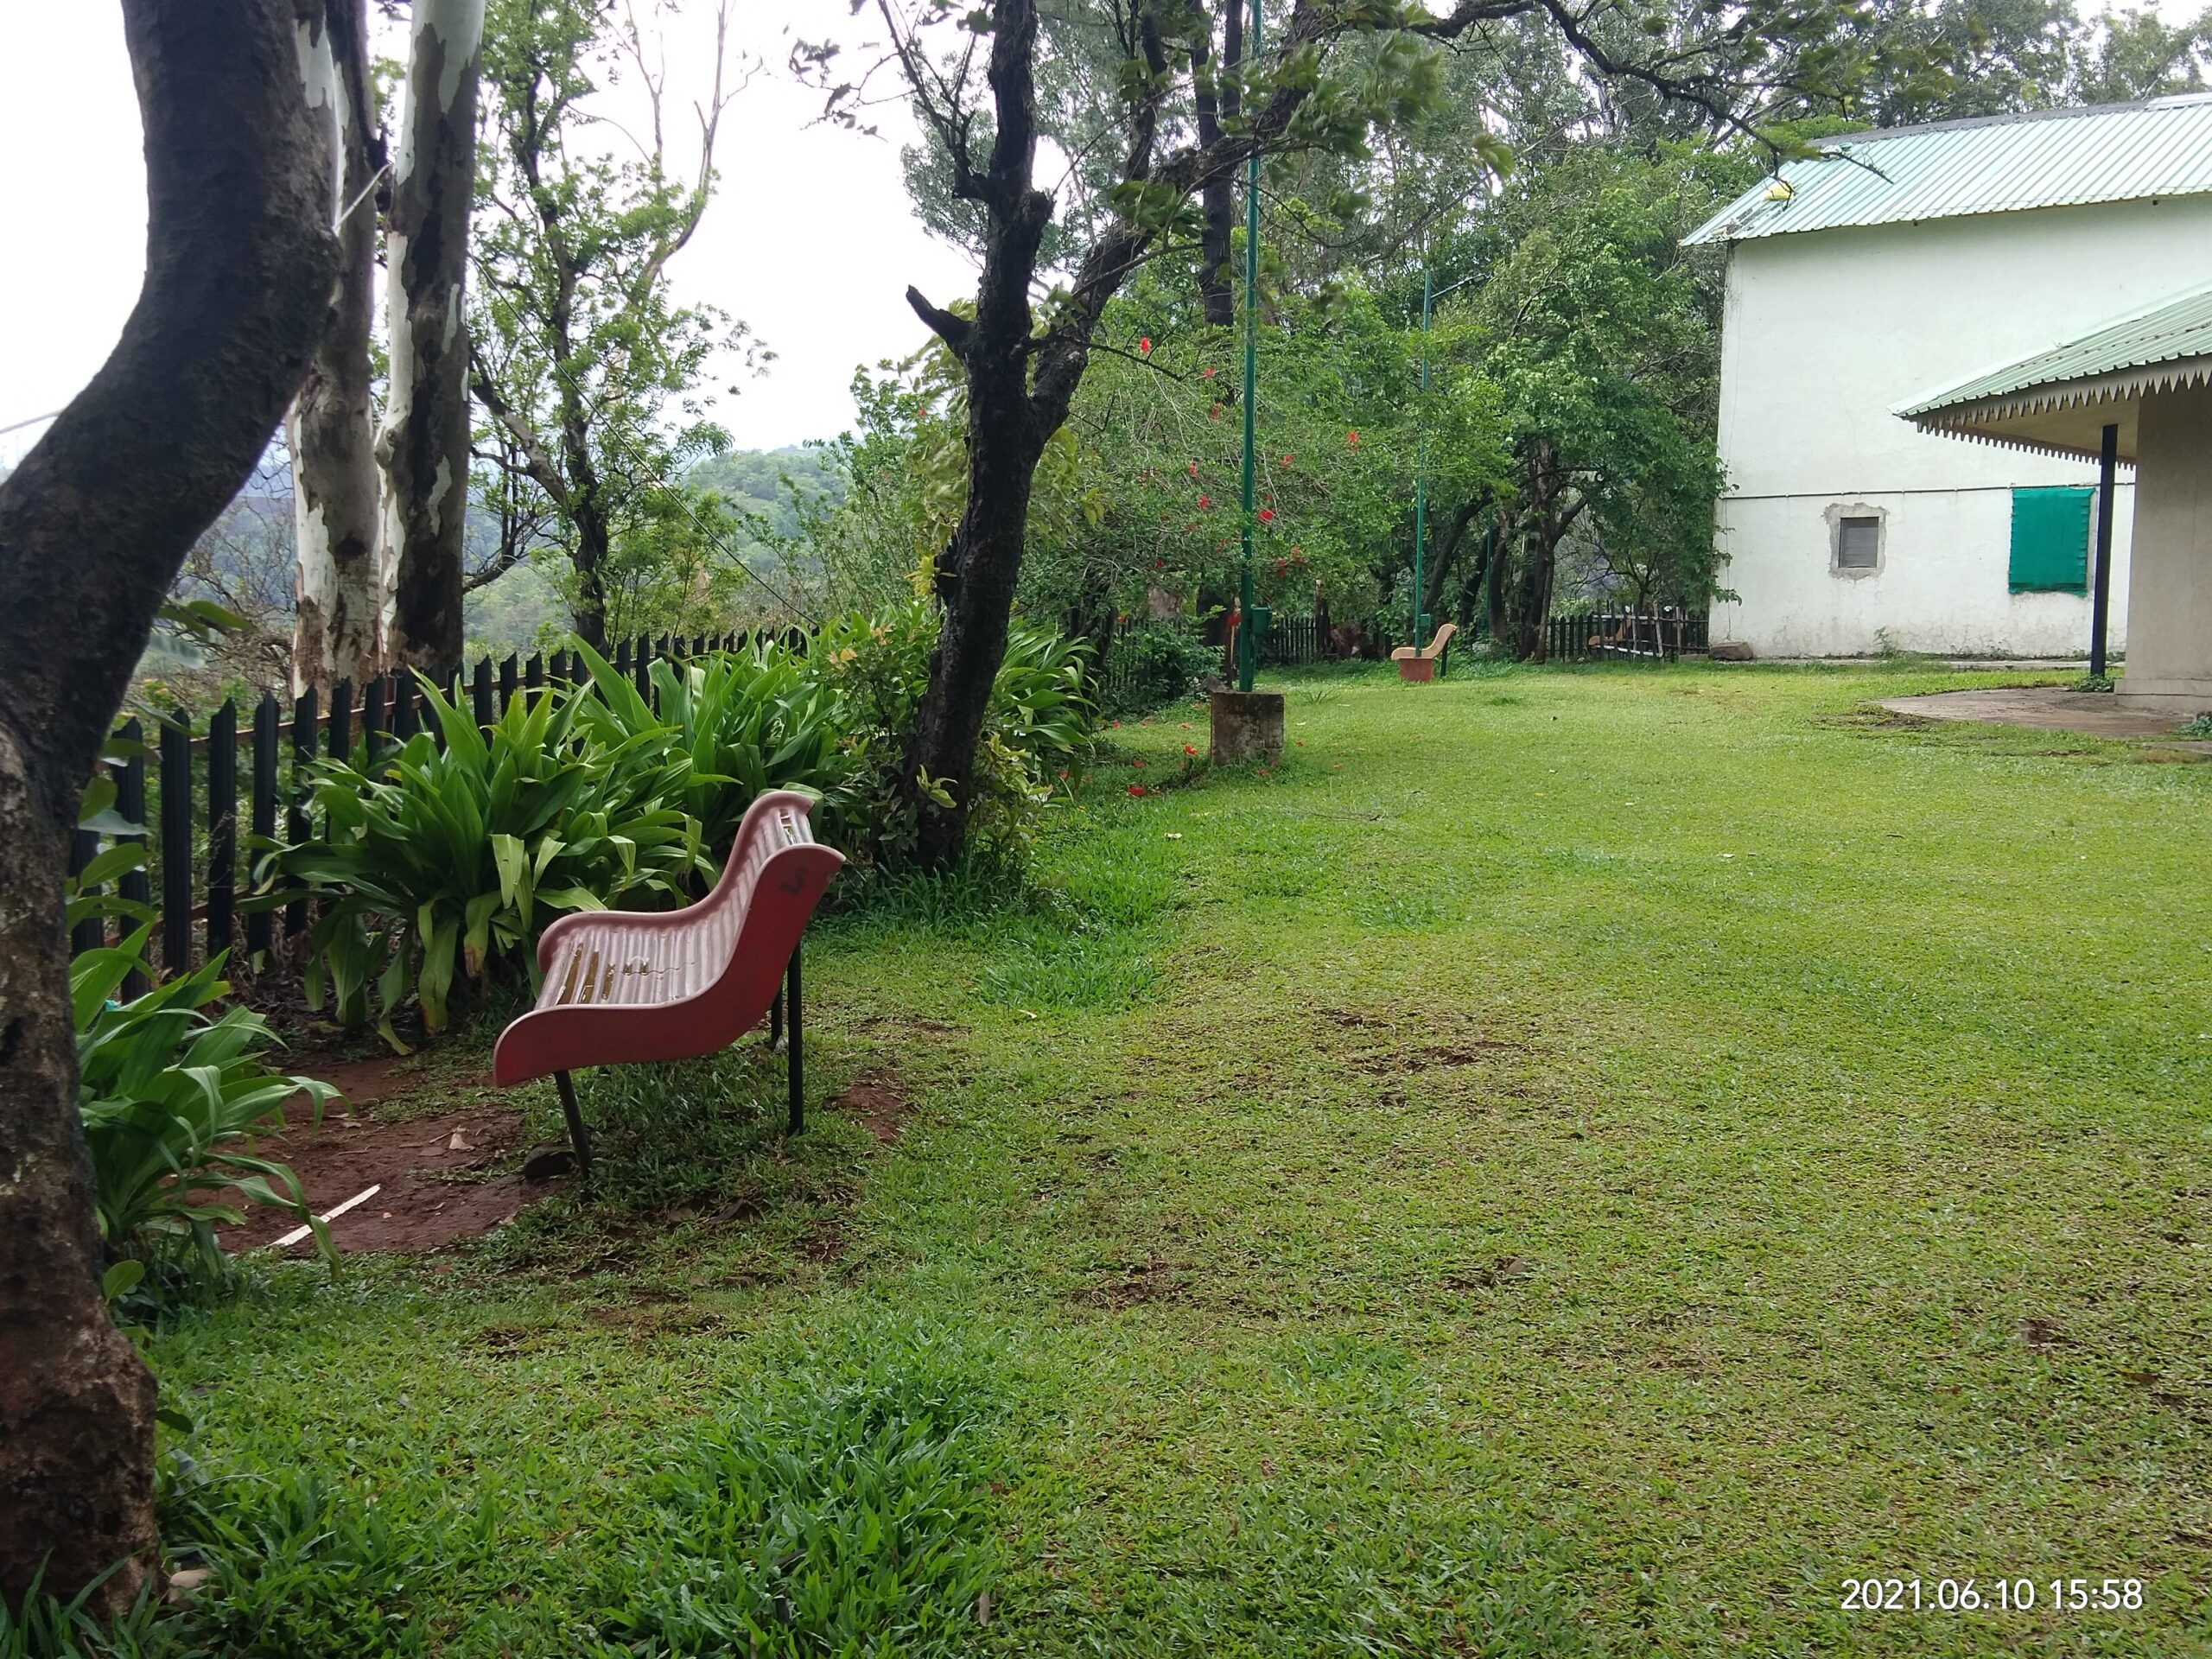 BENCHES IN MTDC RESORT IN BHANDARDARA FACING THE LAKE